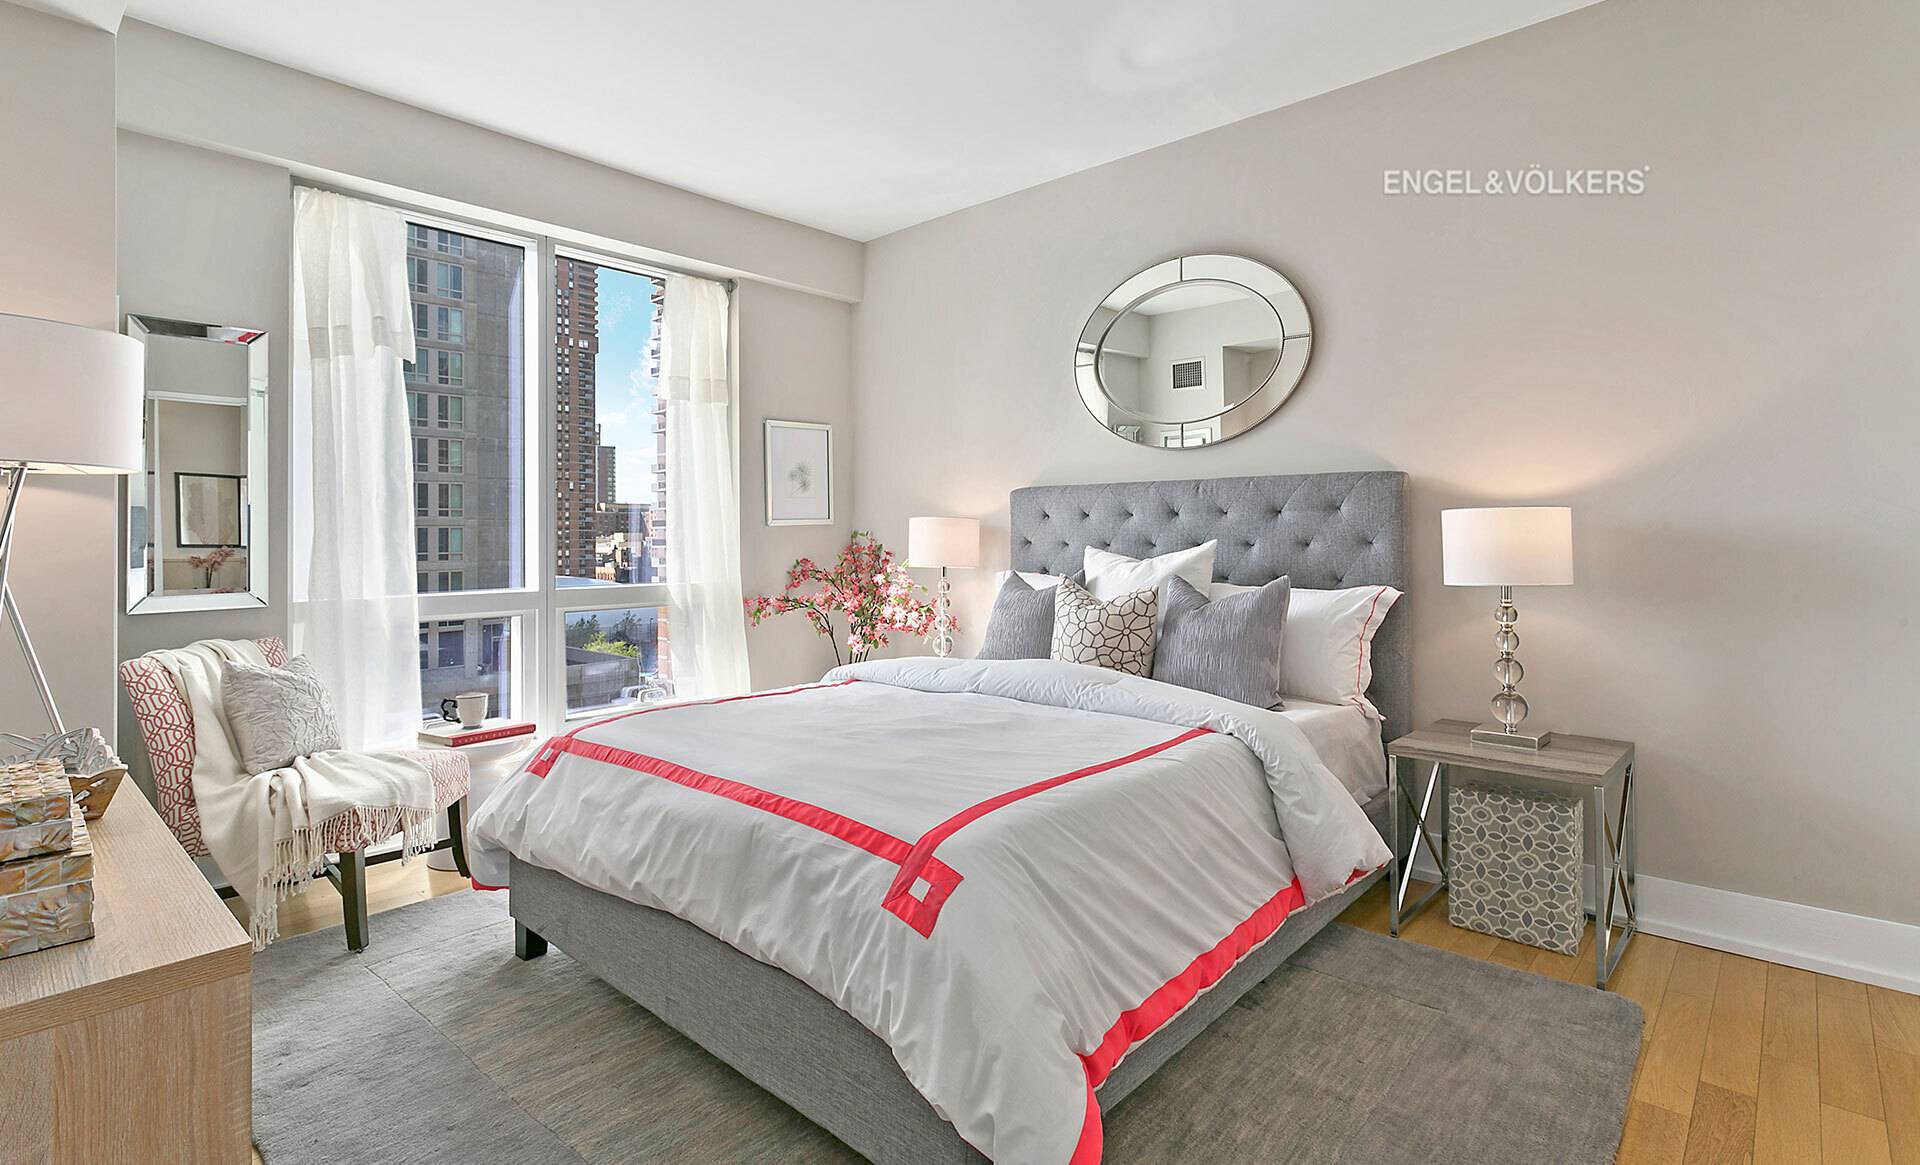 OPEN HOUSE BY APPOINTMENT ONLY PLEASE EMAIL ALL LISTING BROKERS FOR APPOINTMENT Prime Midtown Manhattan Hudson Yards meets the Theater District Gorgeous, Perfectly Proportioned CORNER 2 Bedroom 2 Bath home ...